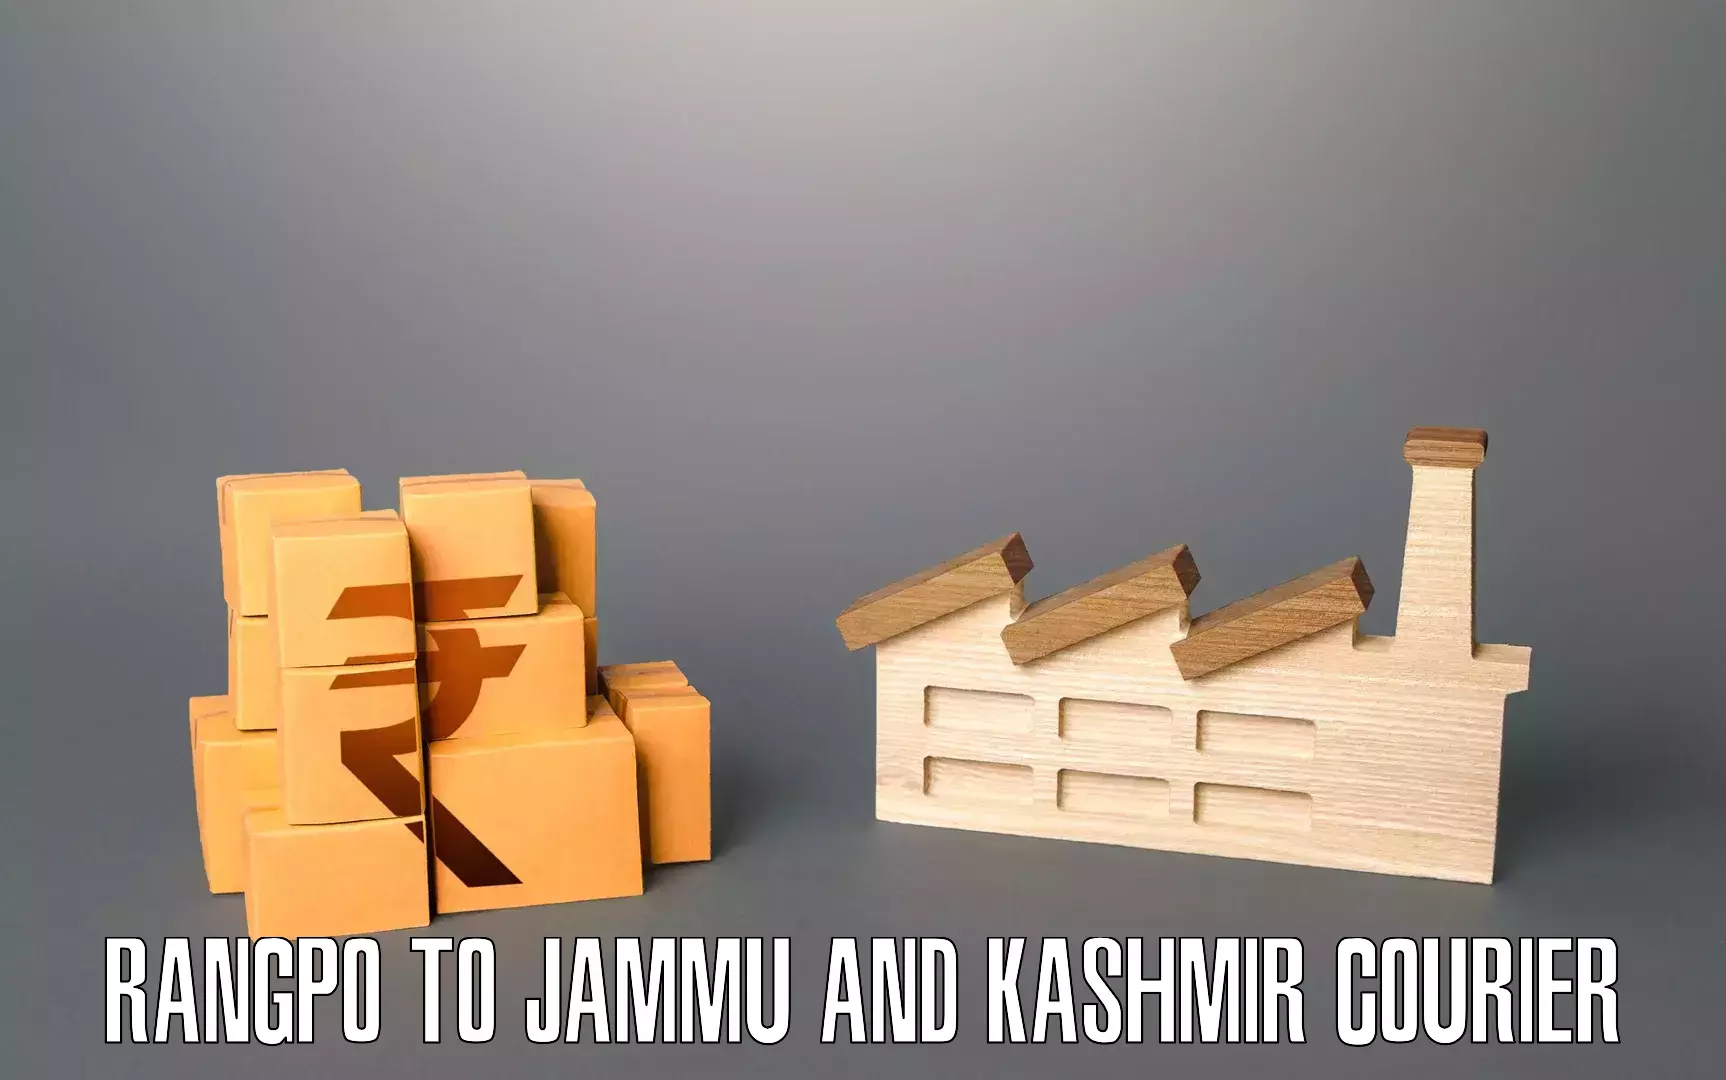 Furniture relocation experts Rangpo to Jammu and Kashmir